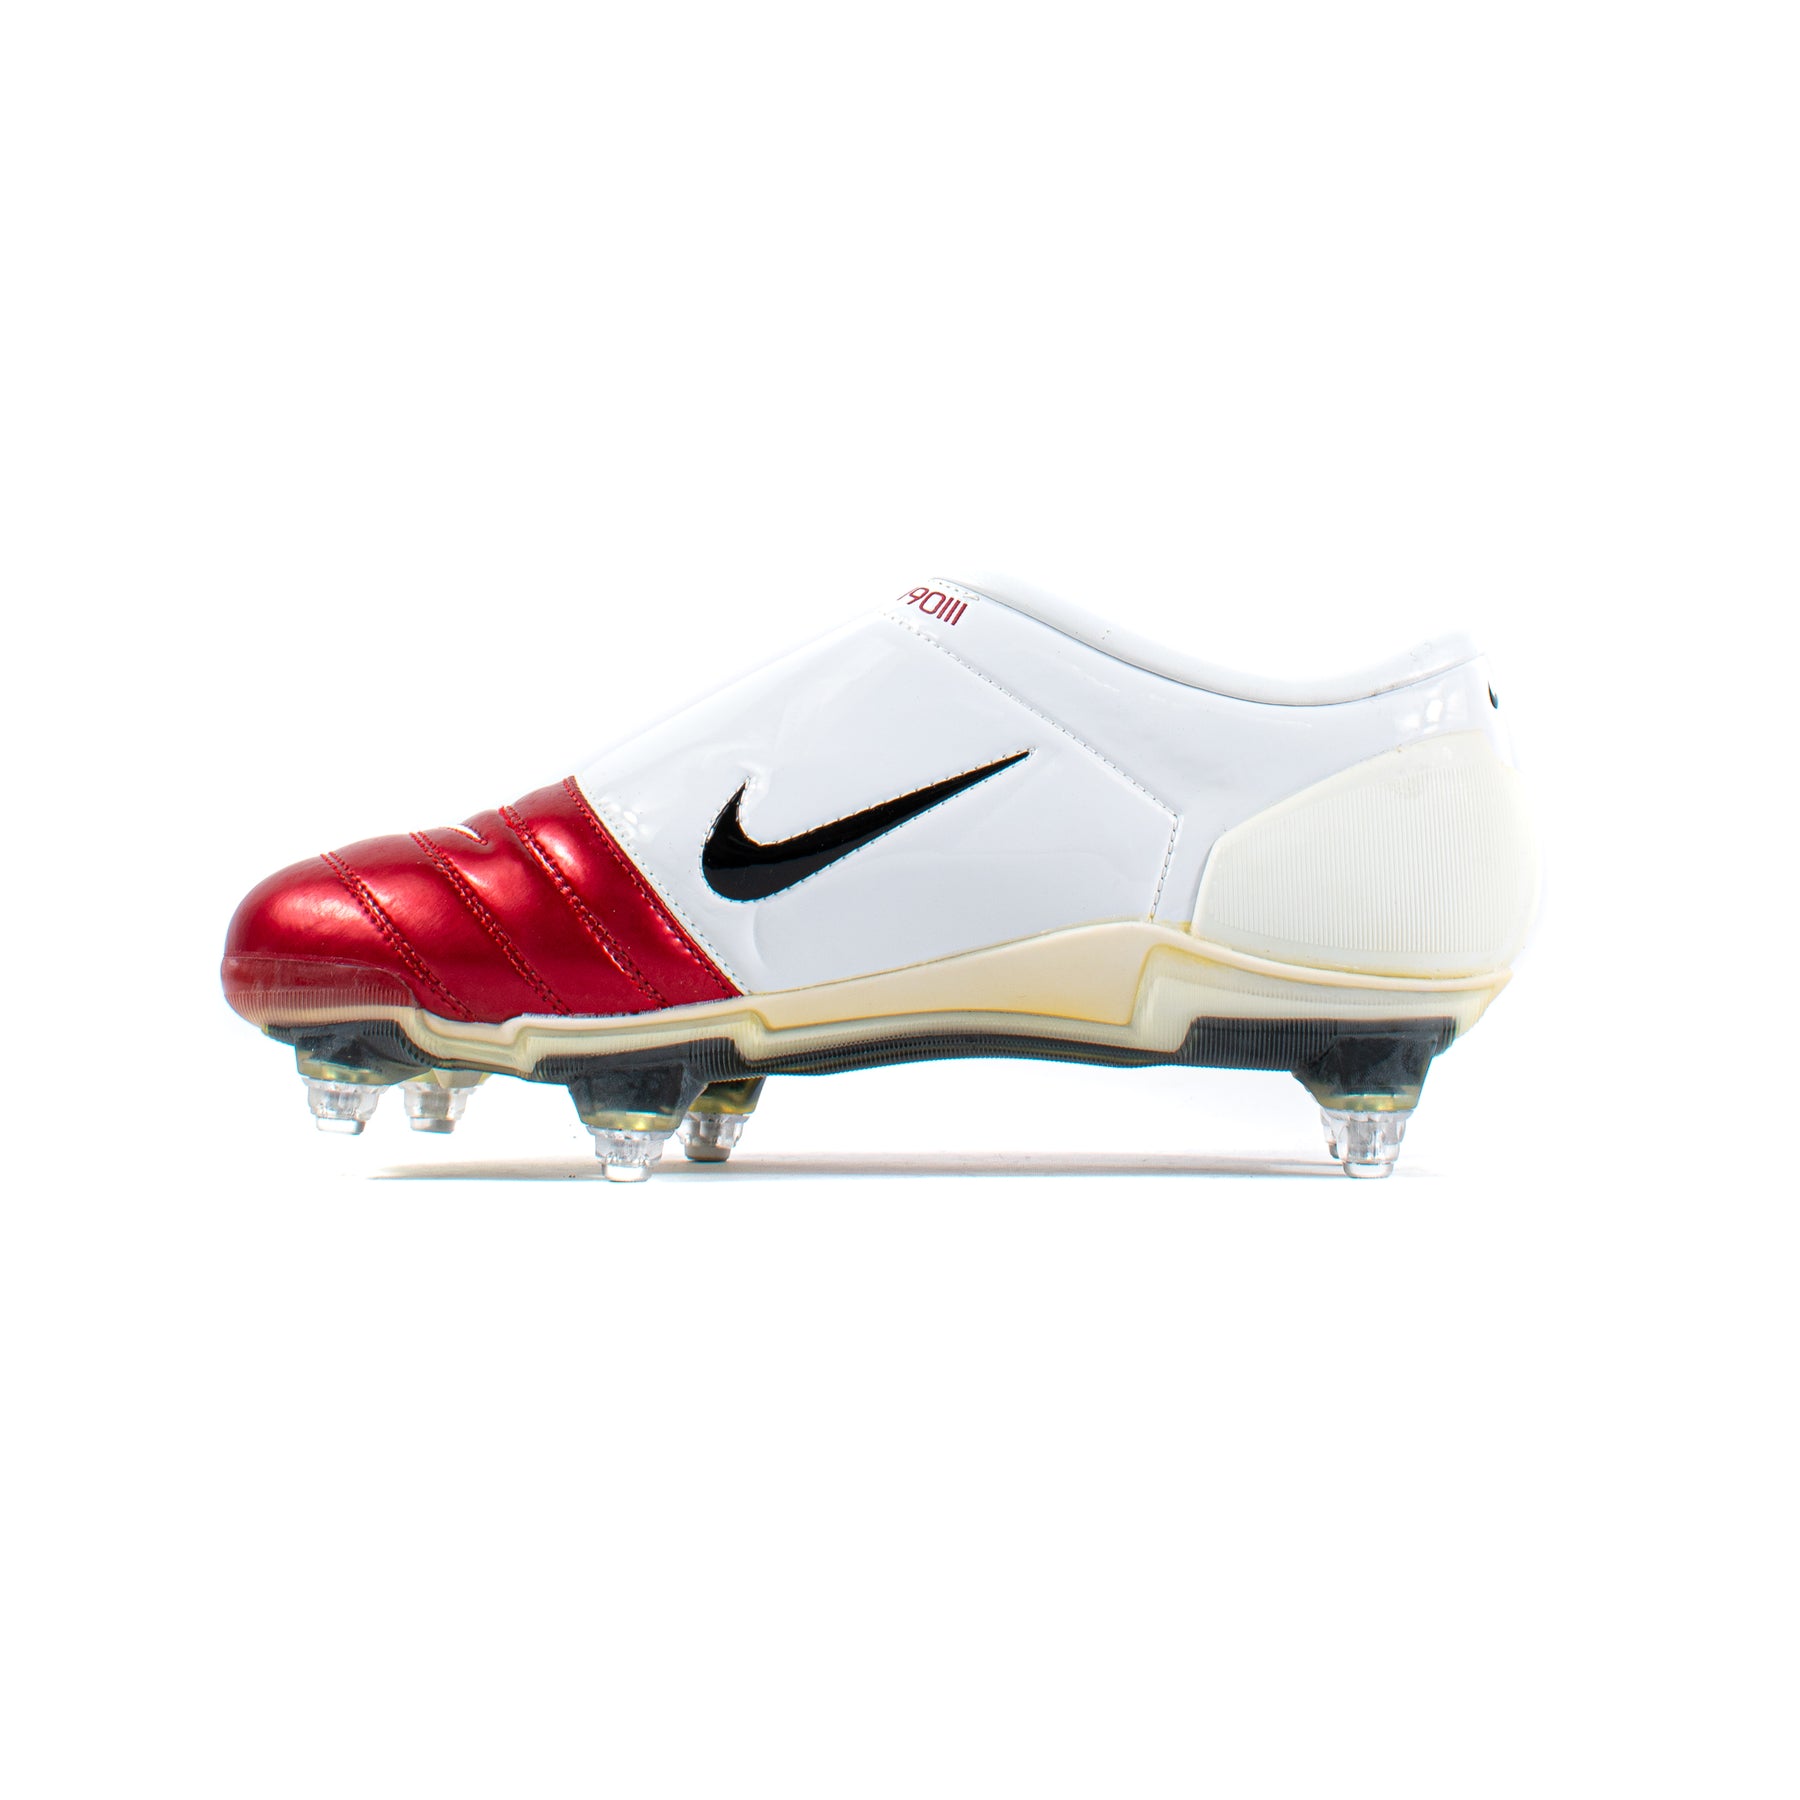 Nike Zoom Total 90 III Comet Red SG – Classic Soccer Cleats